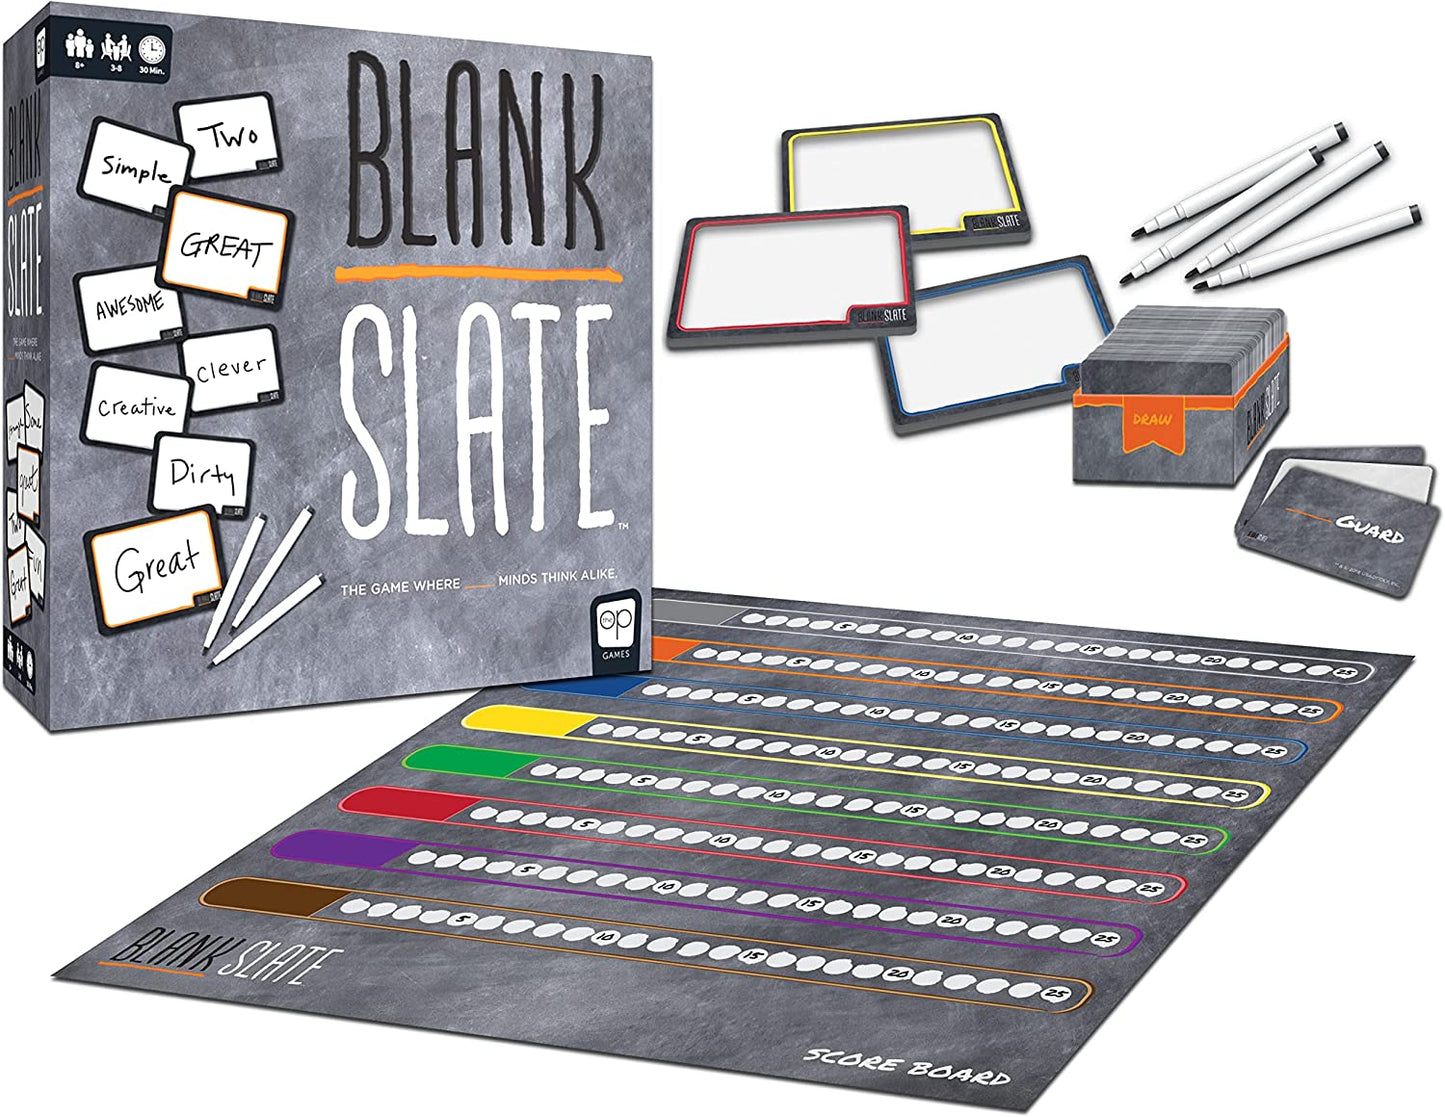 BLANK SLATE - The Game Where Great Minds Think Alike | Fun Family Friendly Word Association Party Game, 3 to 8 players